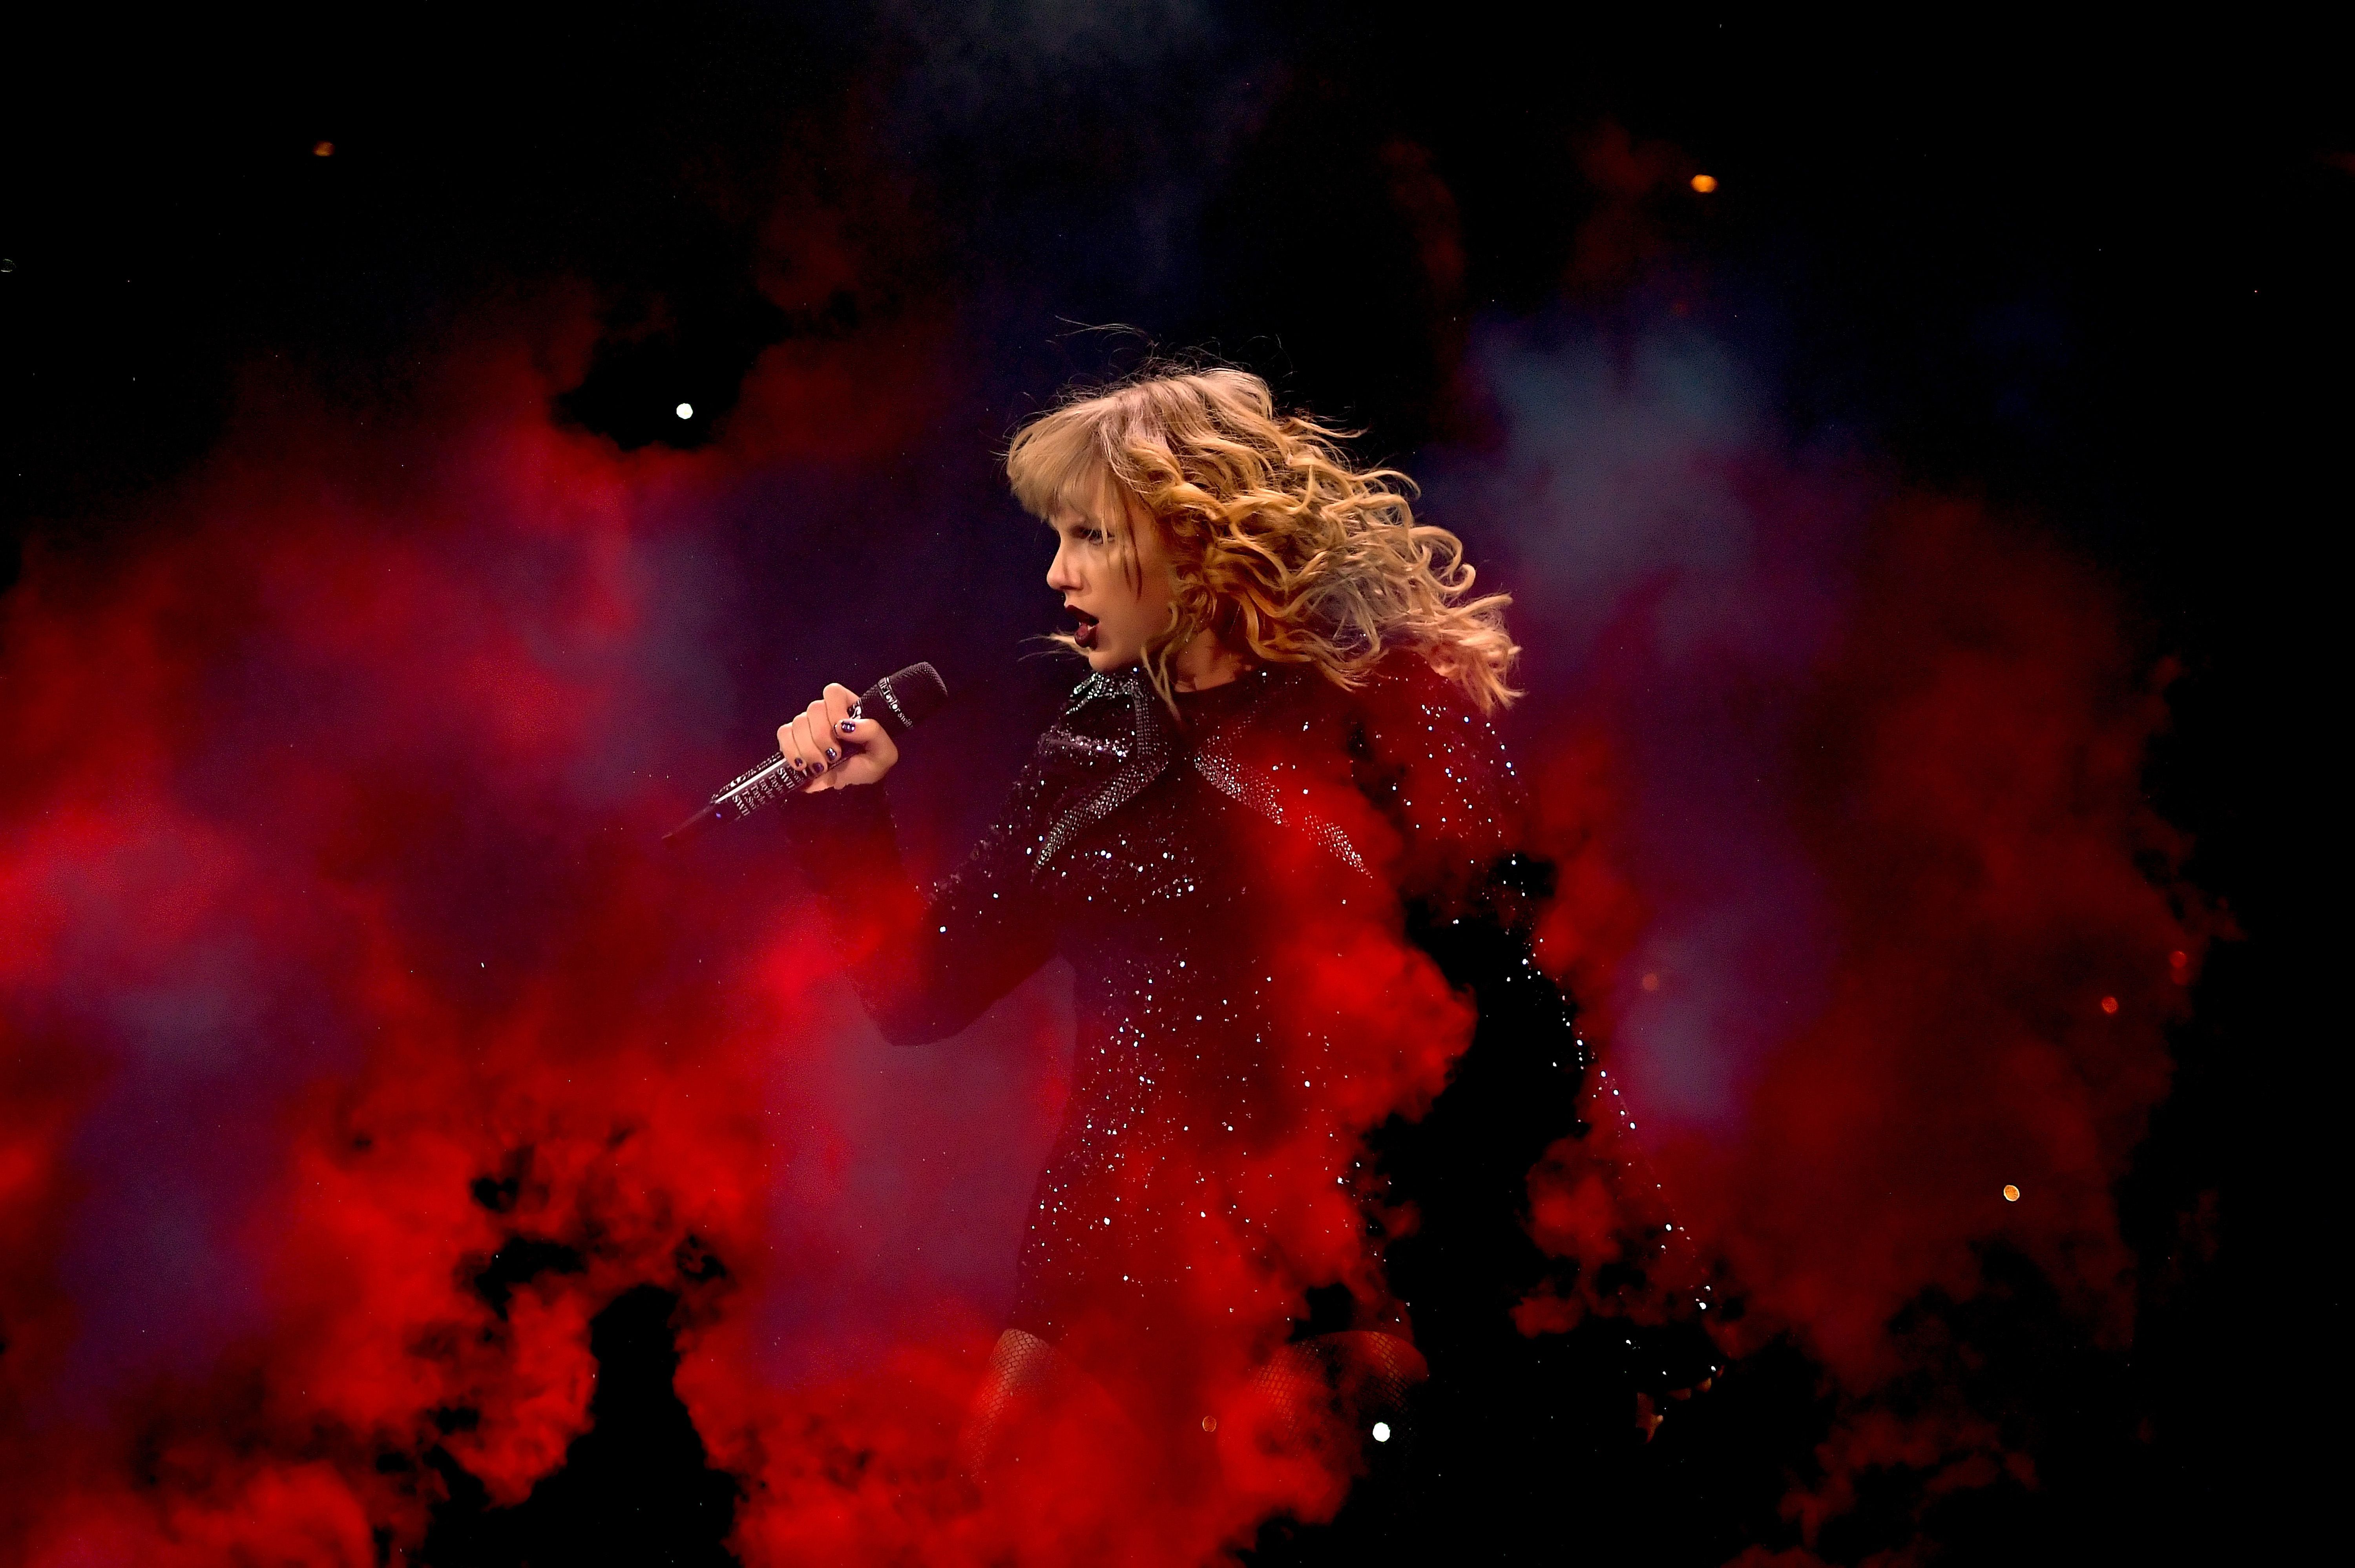 One of the coolest Rep tour pics I've come across. Definitely my